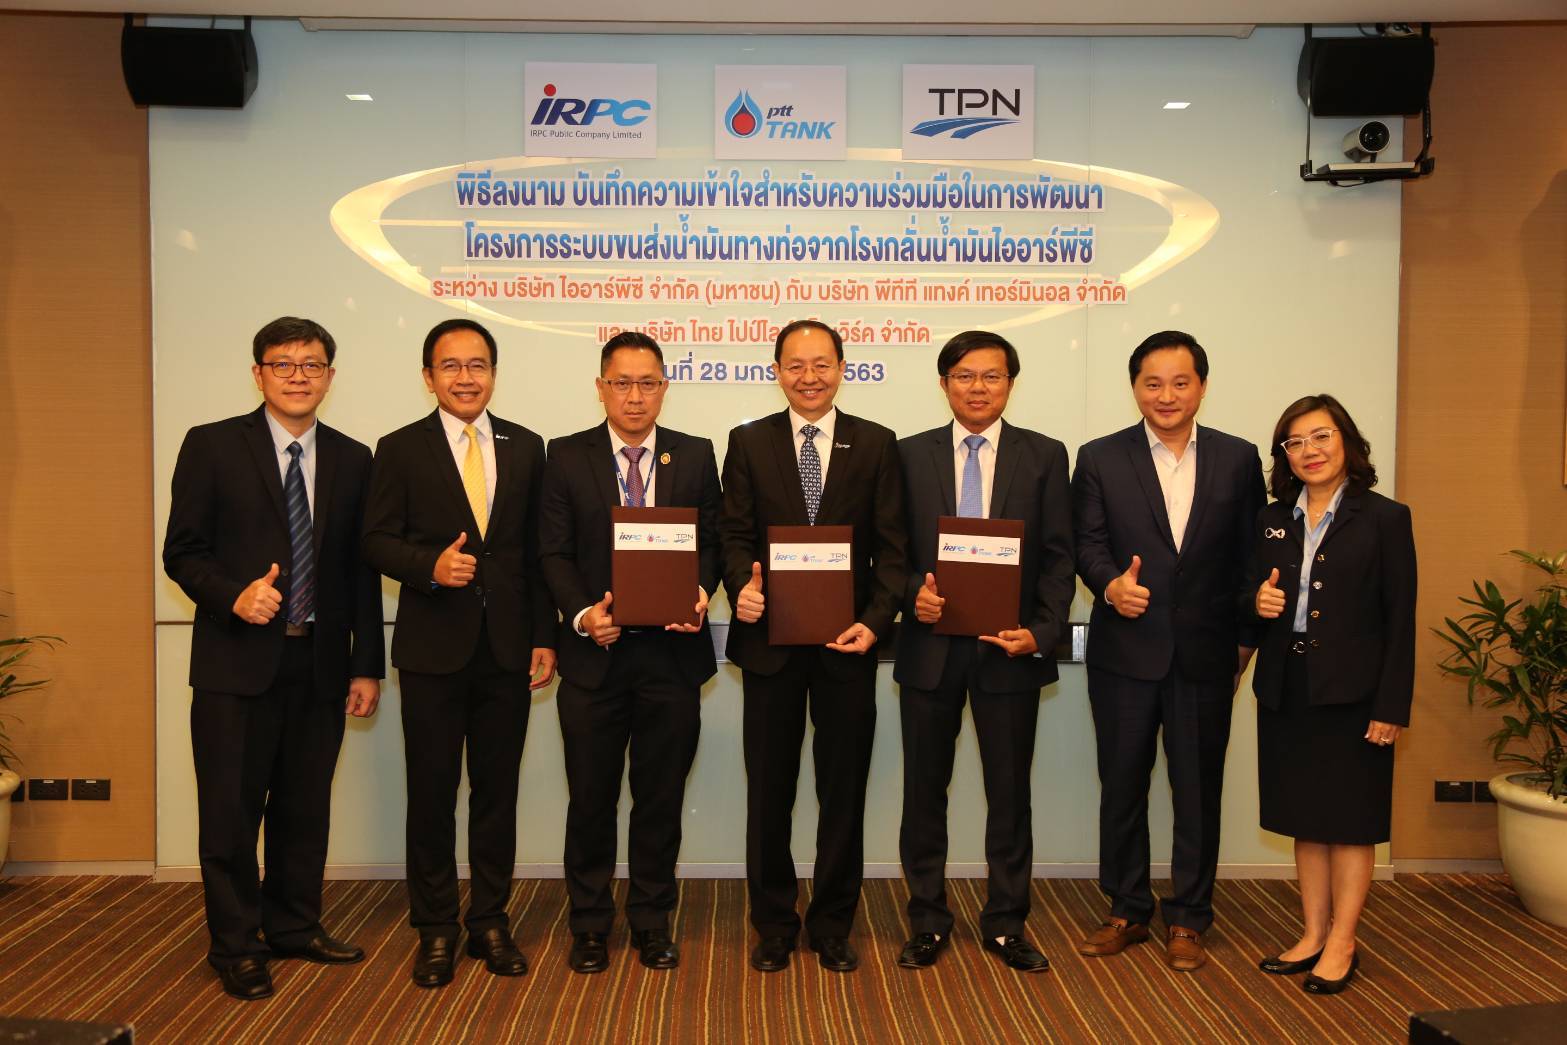 TPN signed a MOU for the Cooperation in the Development of 